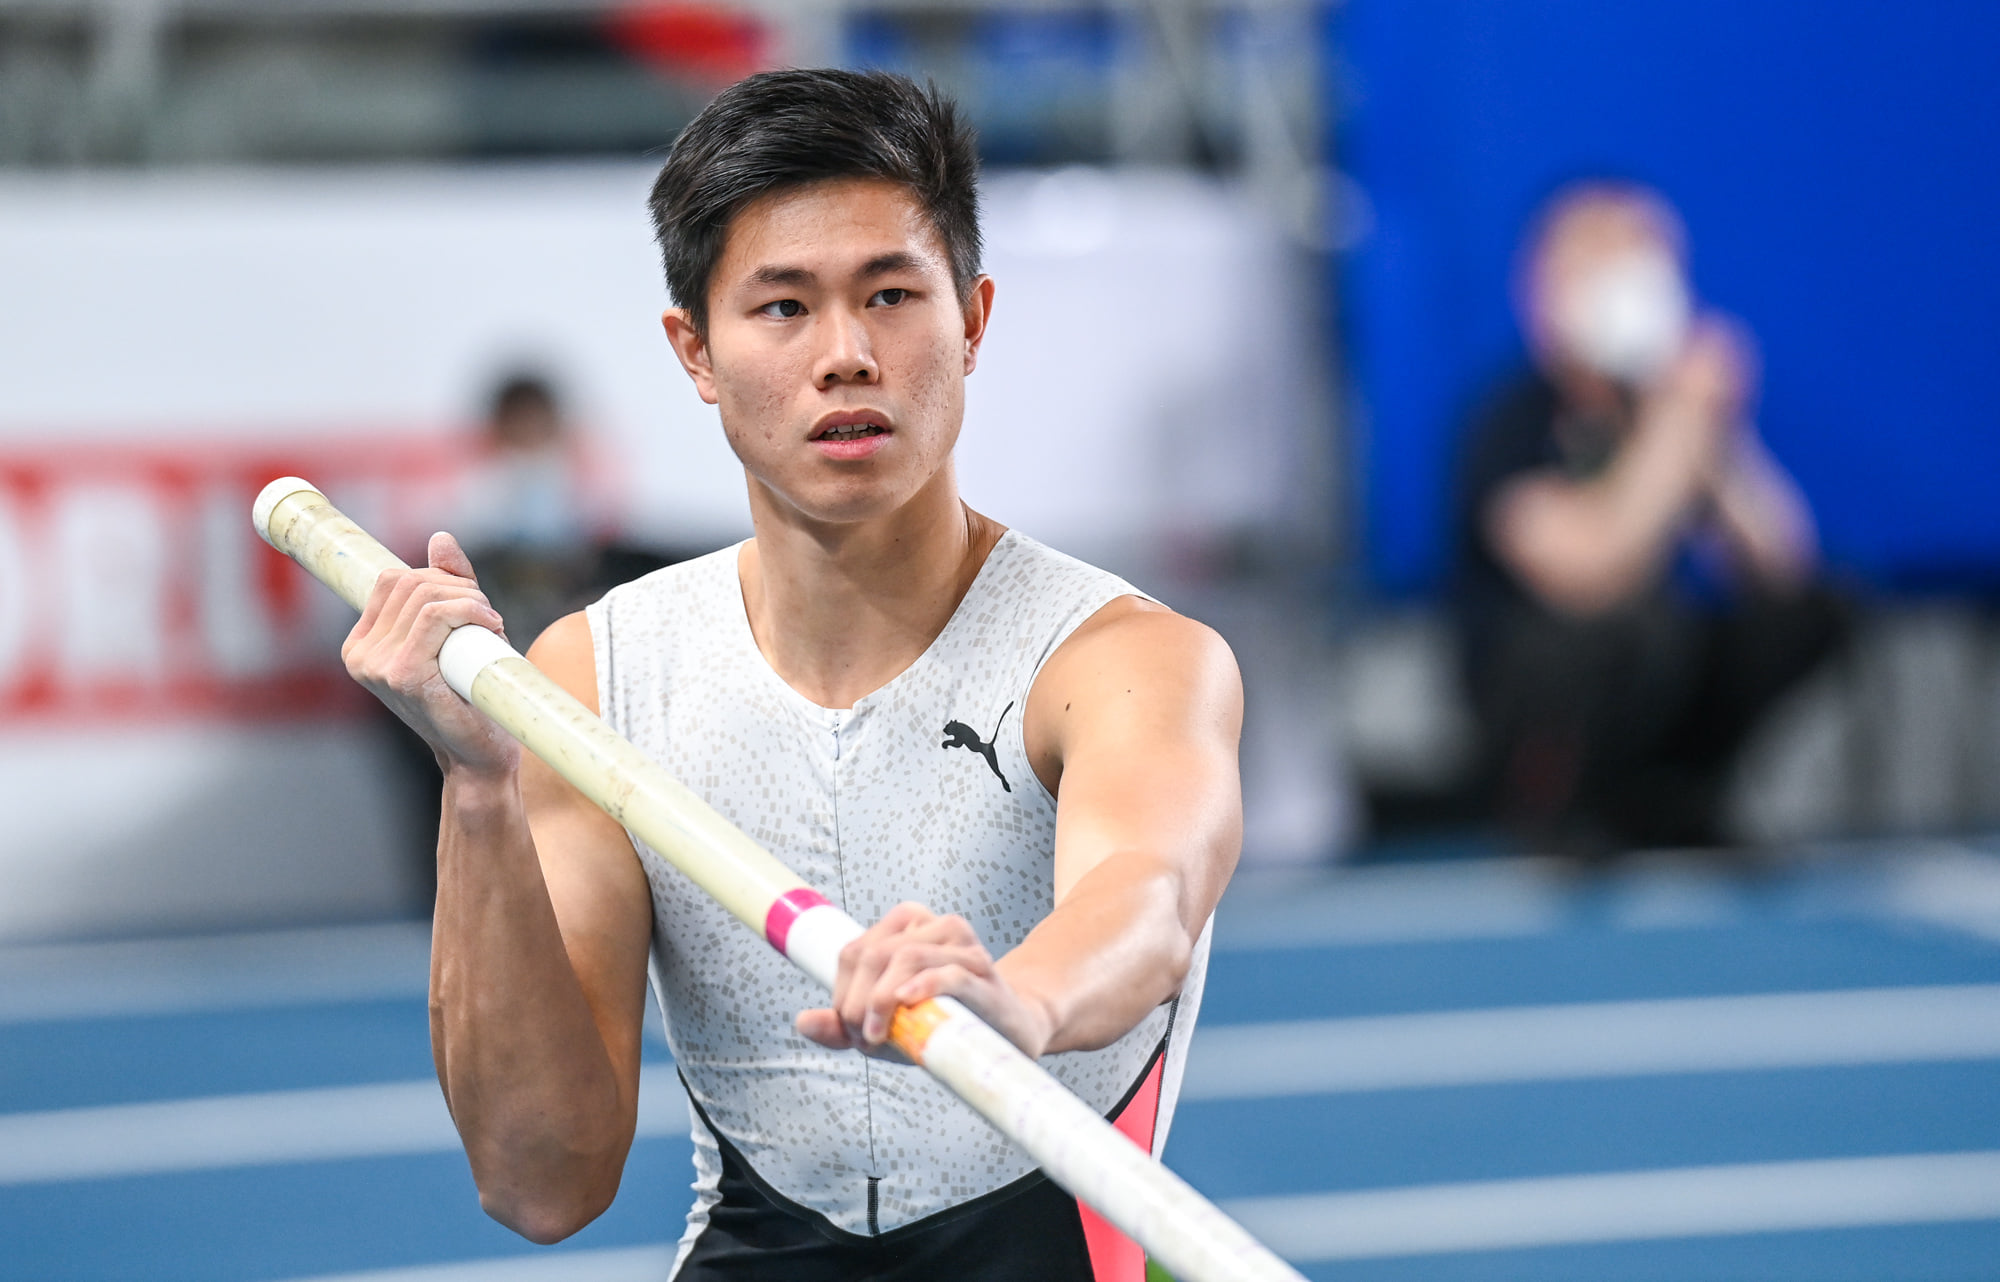 Filipino pole vaulter EJ Obiena during the Orlen Copernicus Cup.